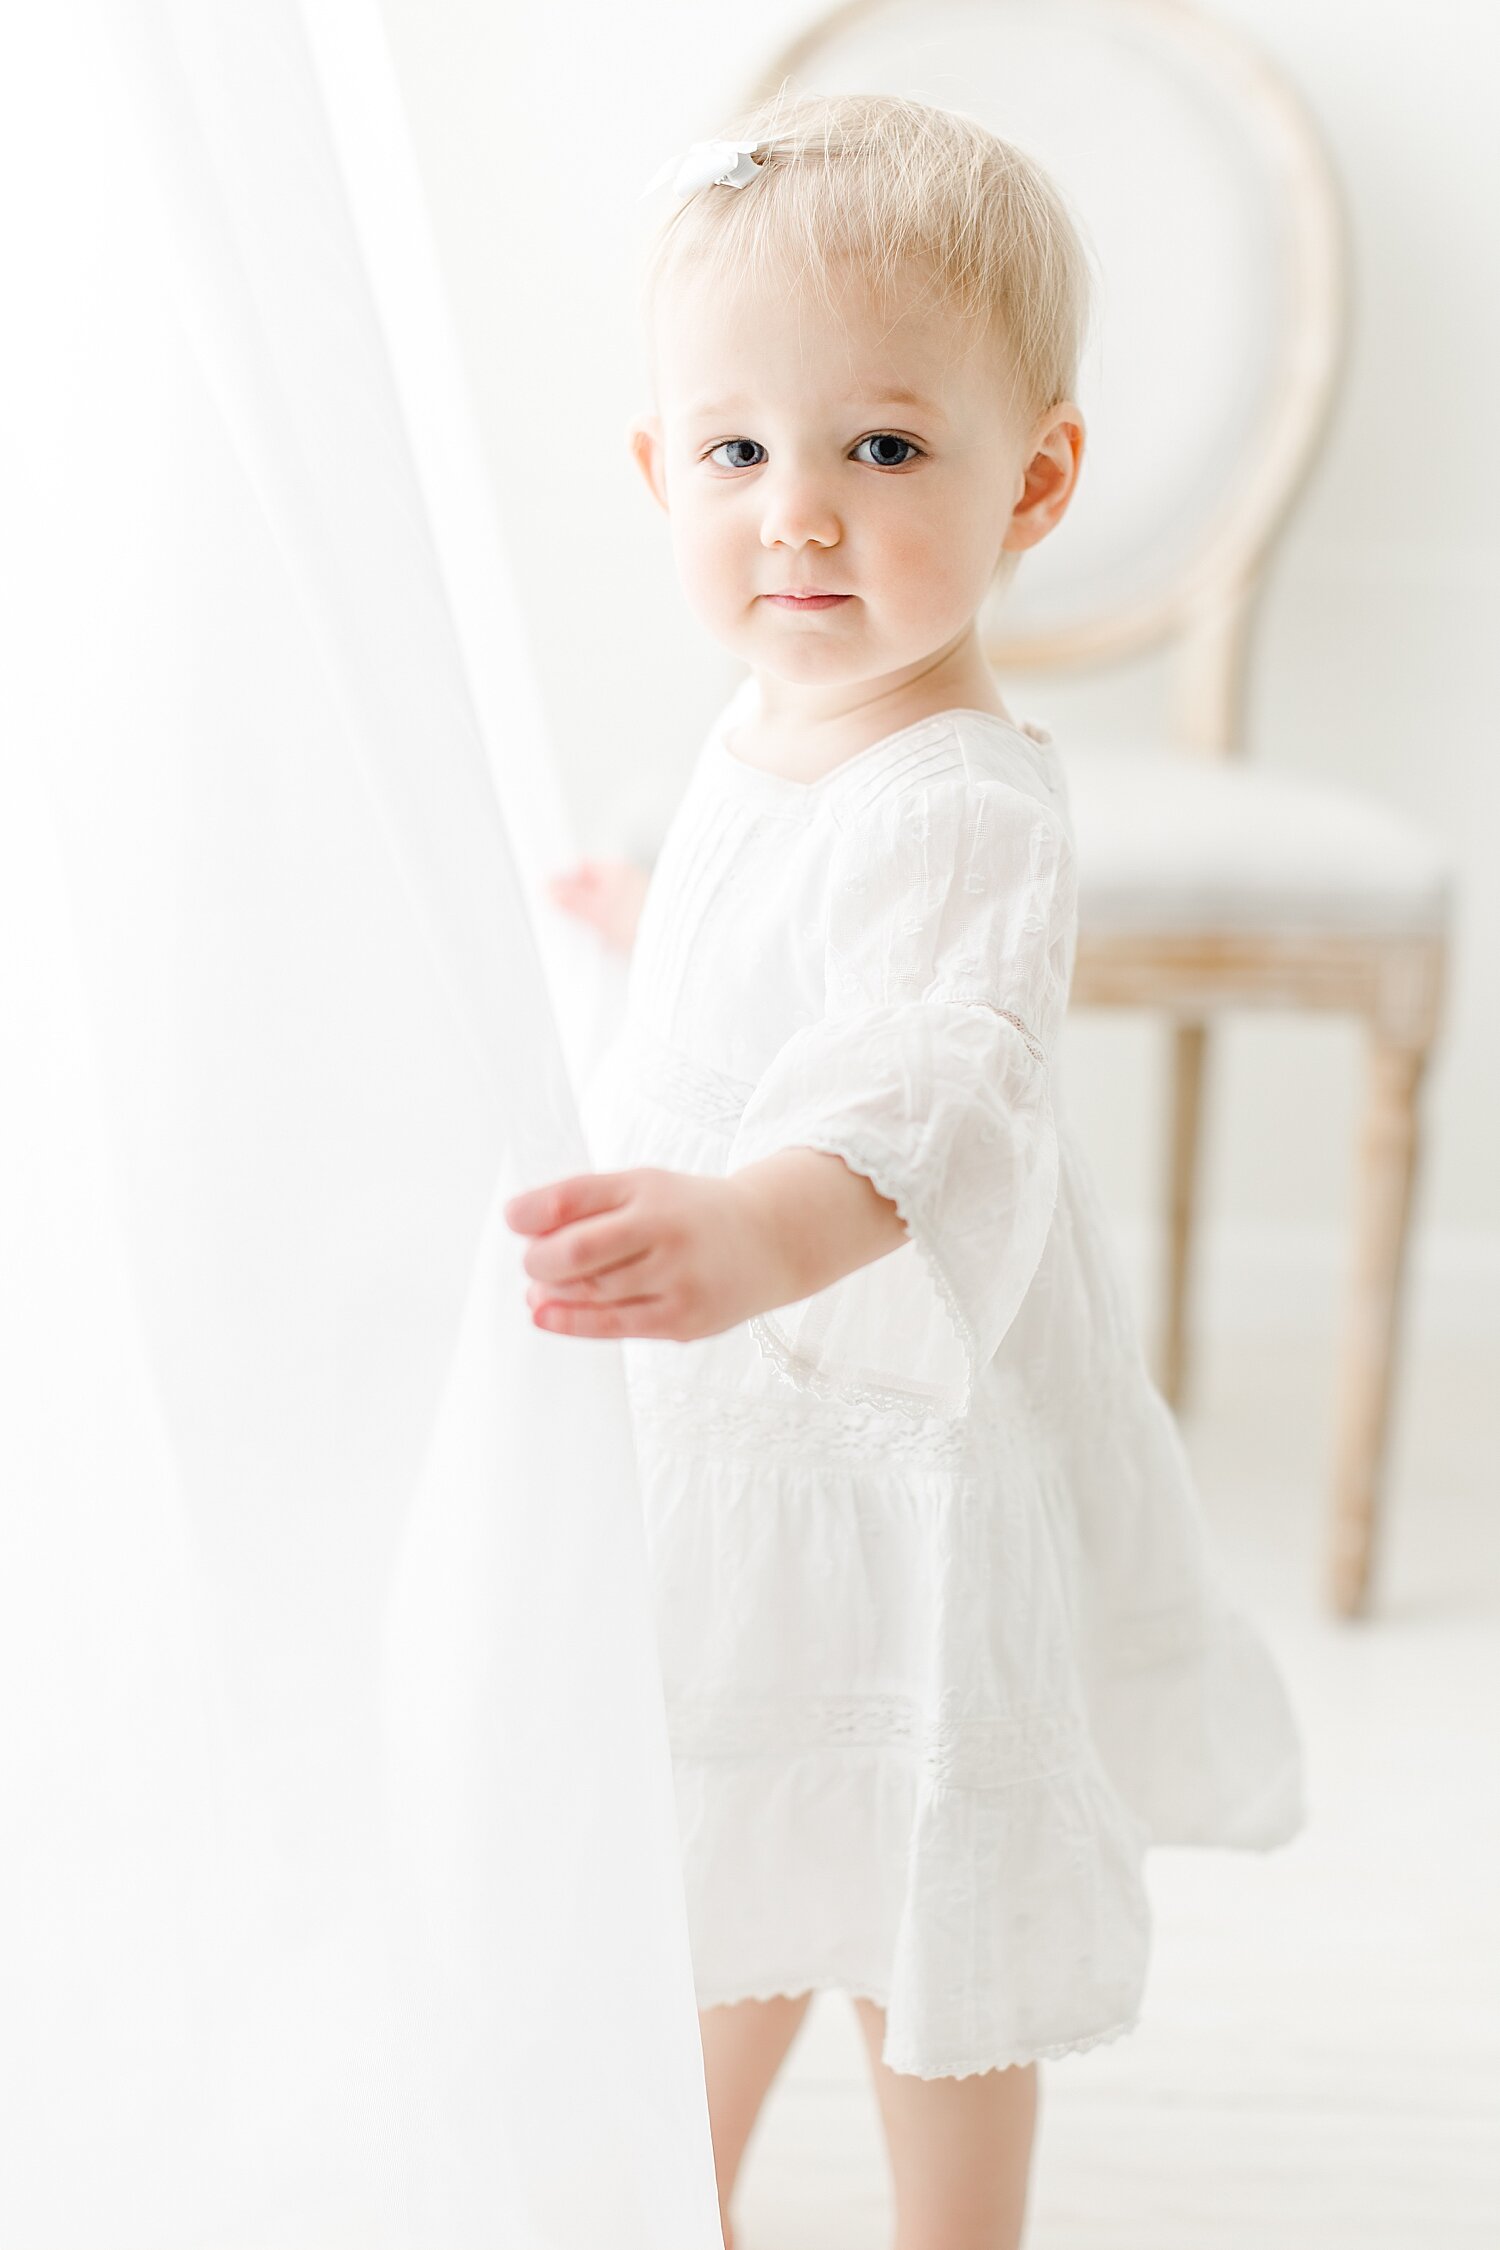 Classic children's portrait of 18 month old little girl playing in curtains. Photo by Kristin Wood Photography.